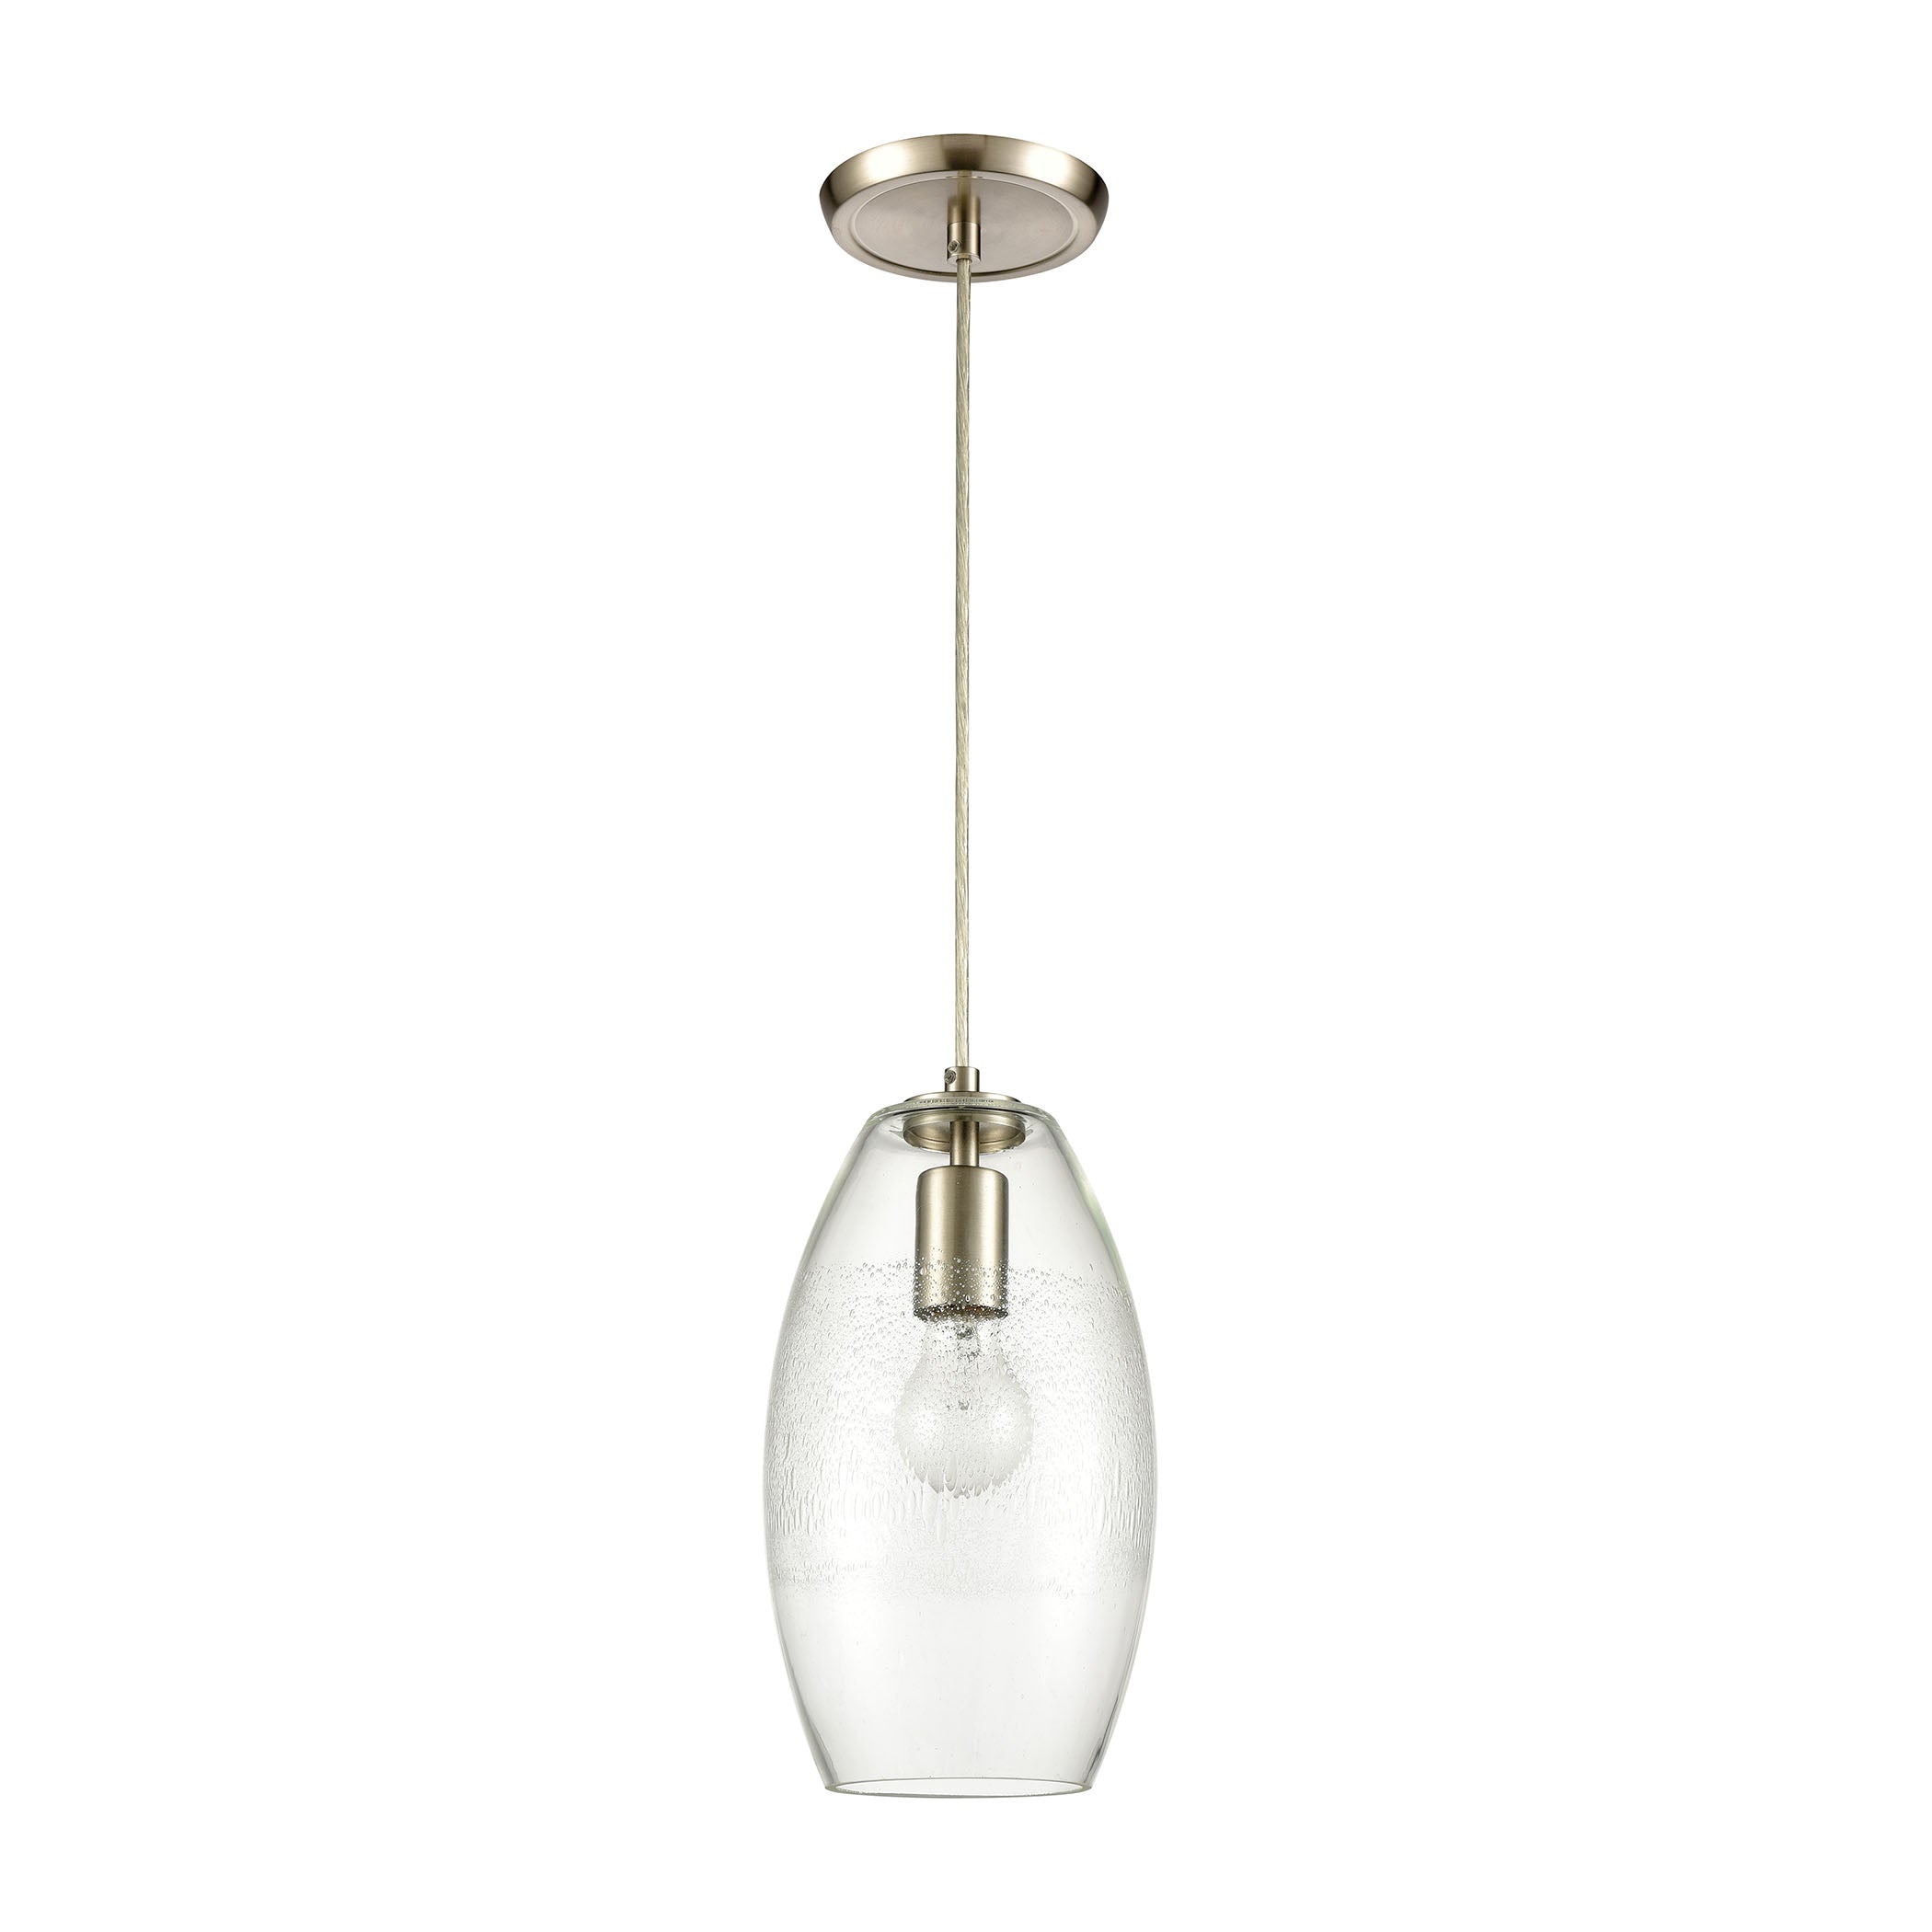 ELK Lighting 30200/1 Ebbtide 1-Light Mini Pendant in Satin Nickel with Clear and Lightly Textured Glass